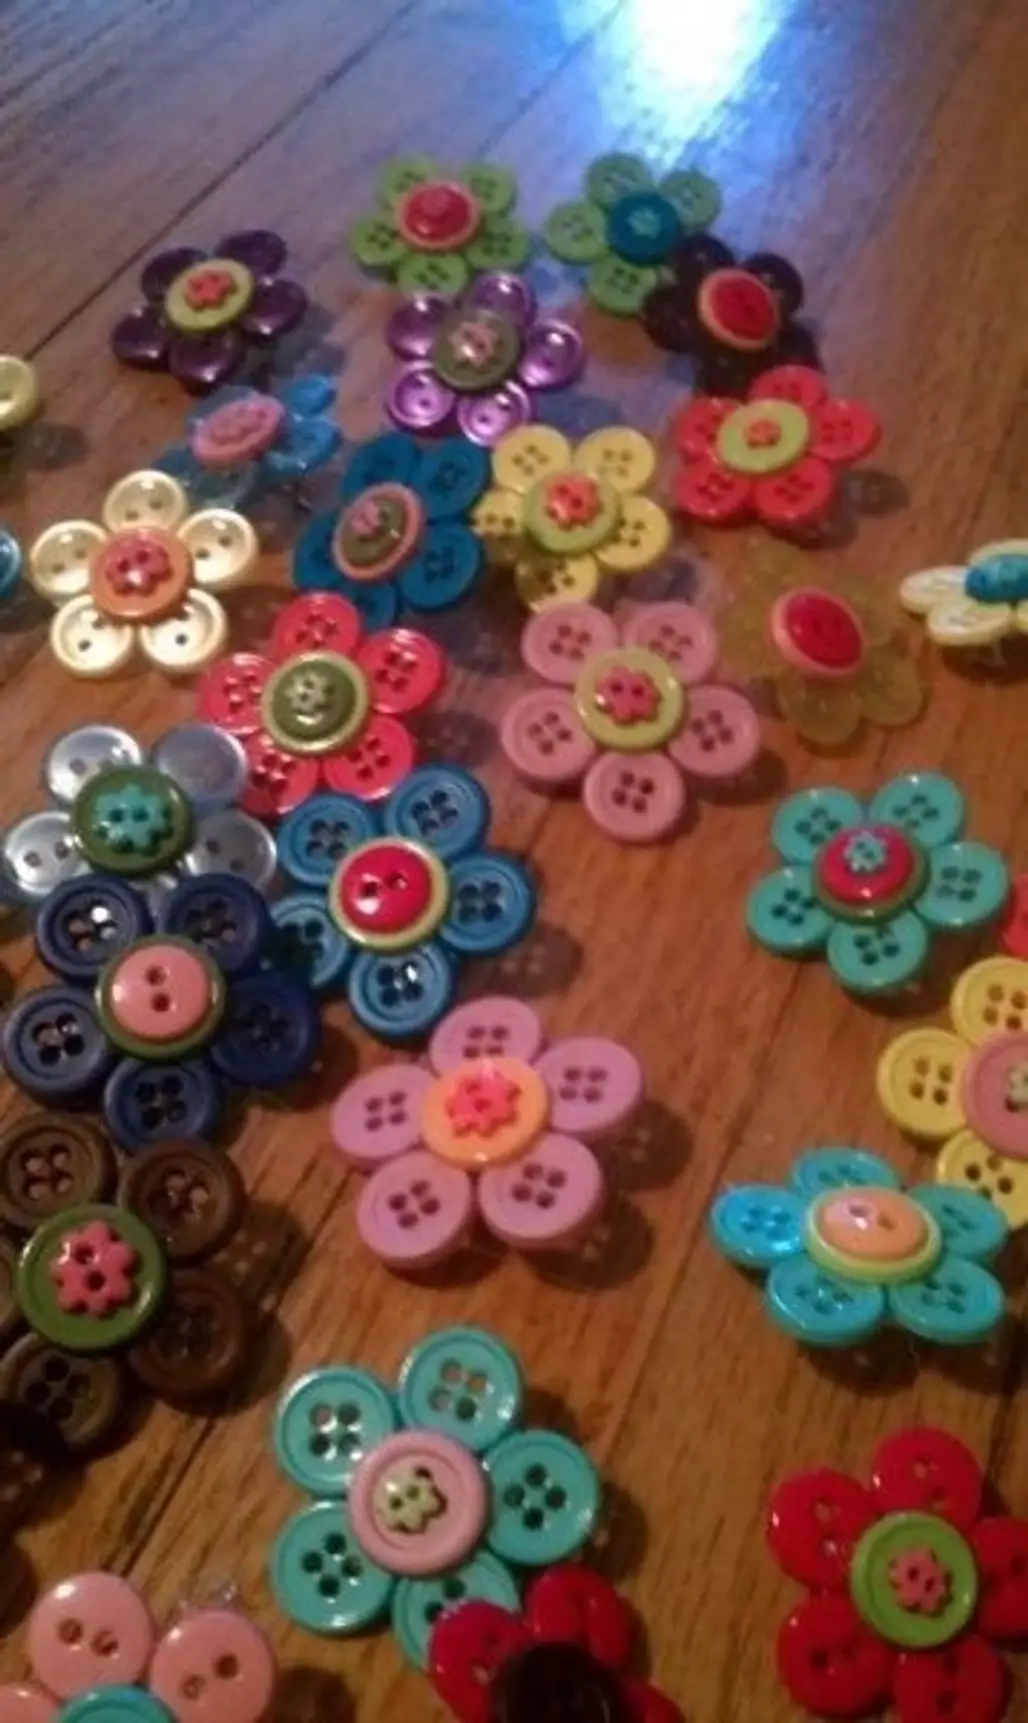 Beautiful Flower Pins Made from Buttons